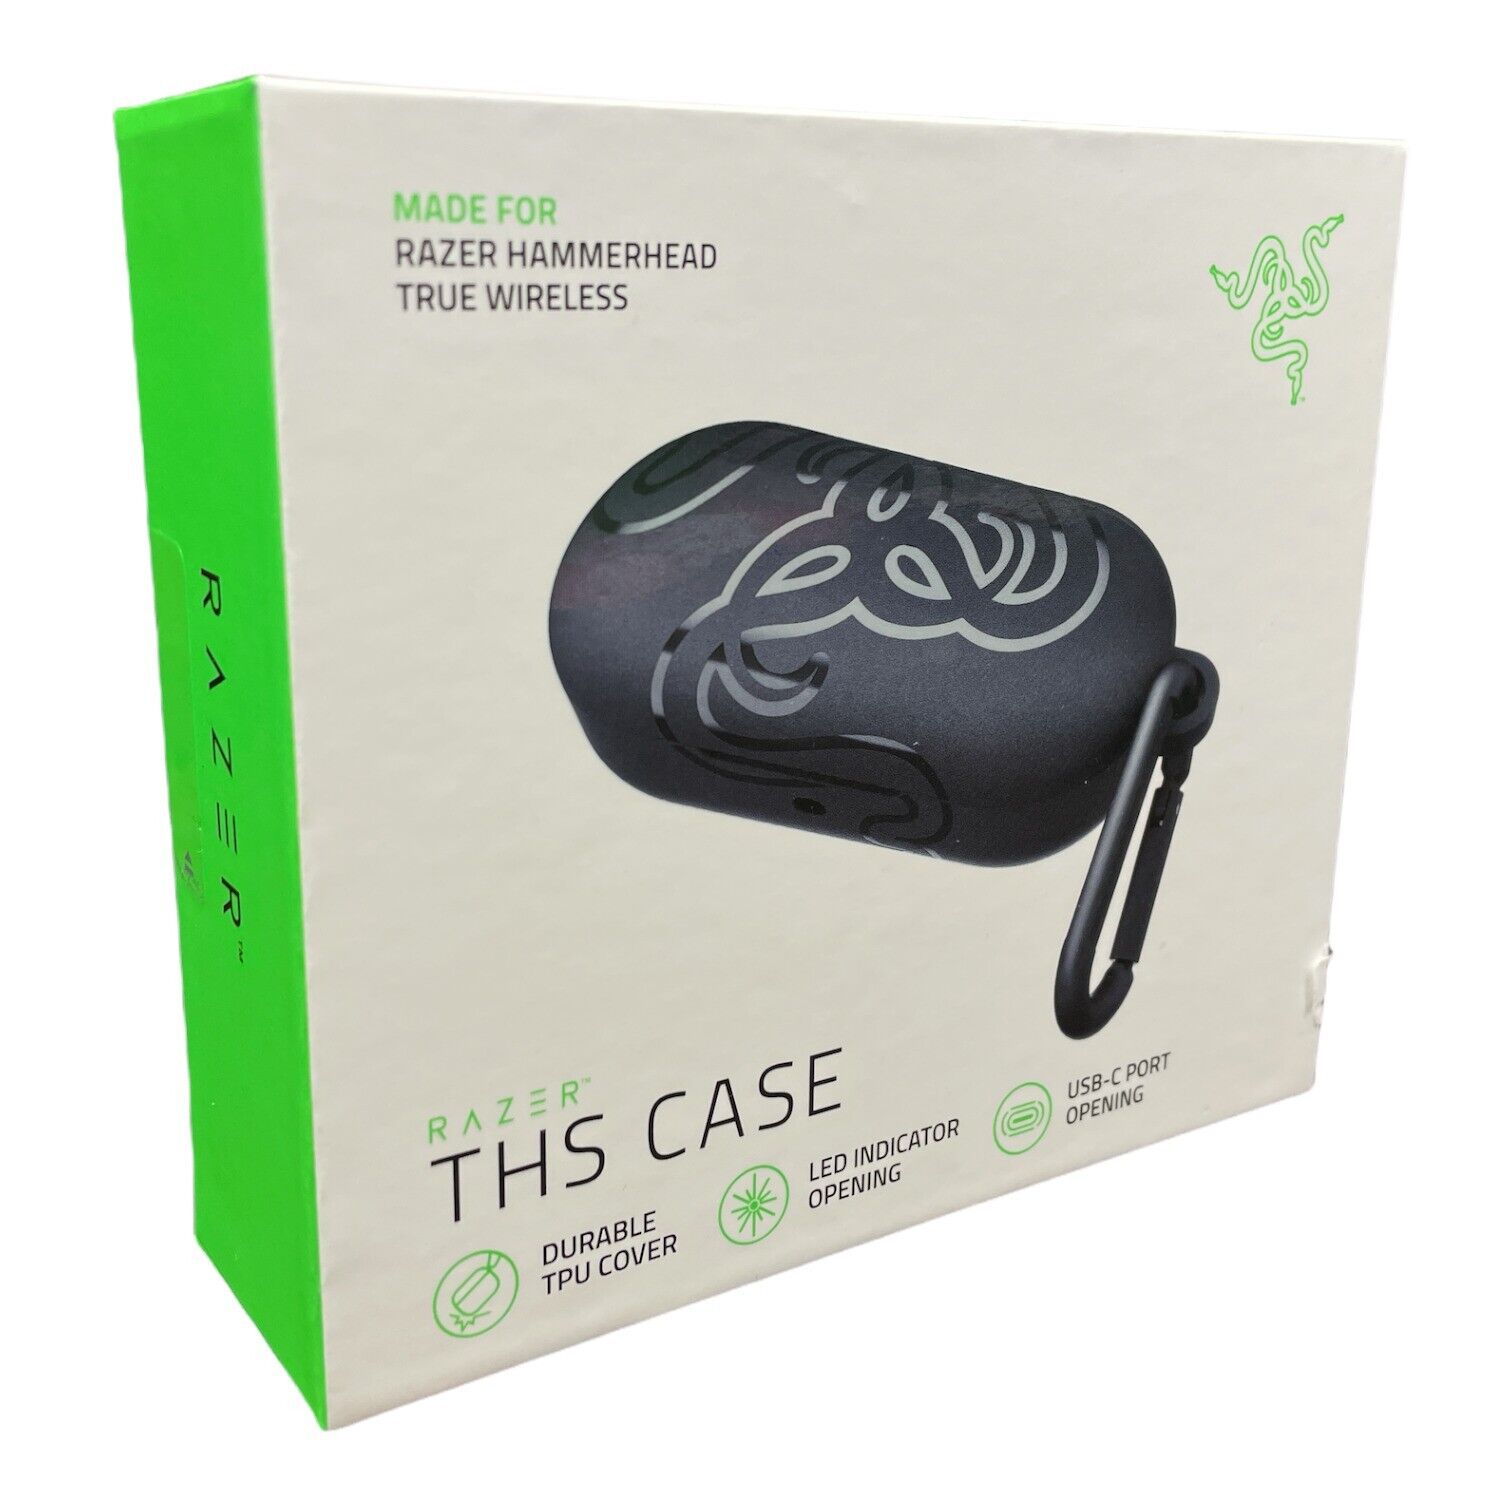 Razer THS Protective Cover/Covering for Razer Hammerhead's Charging Case